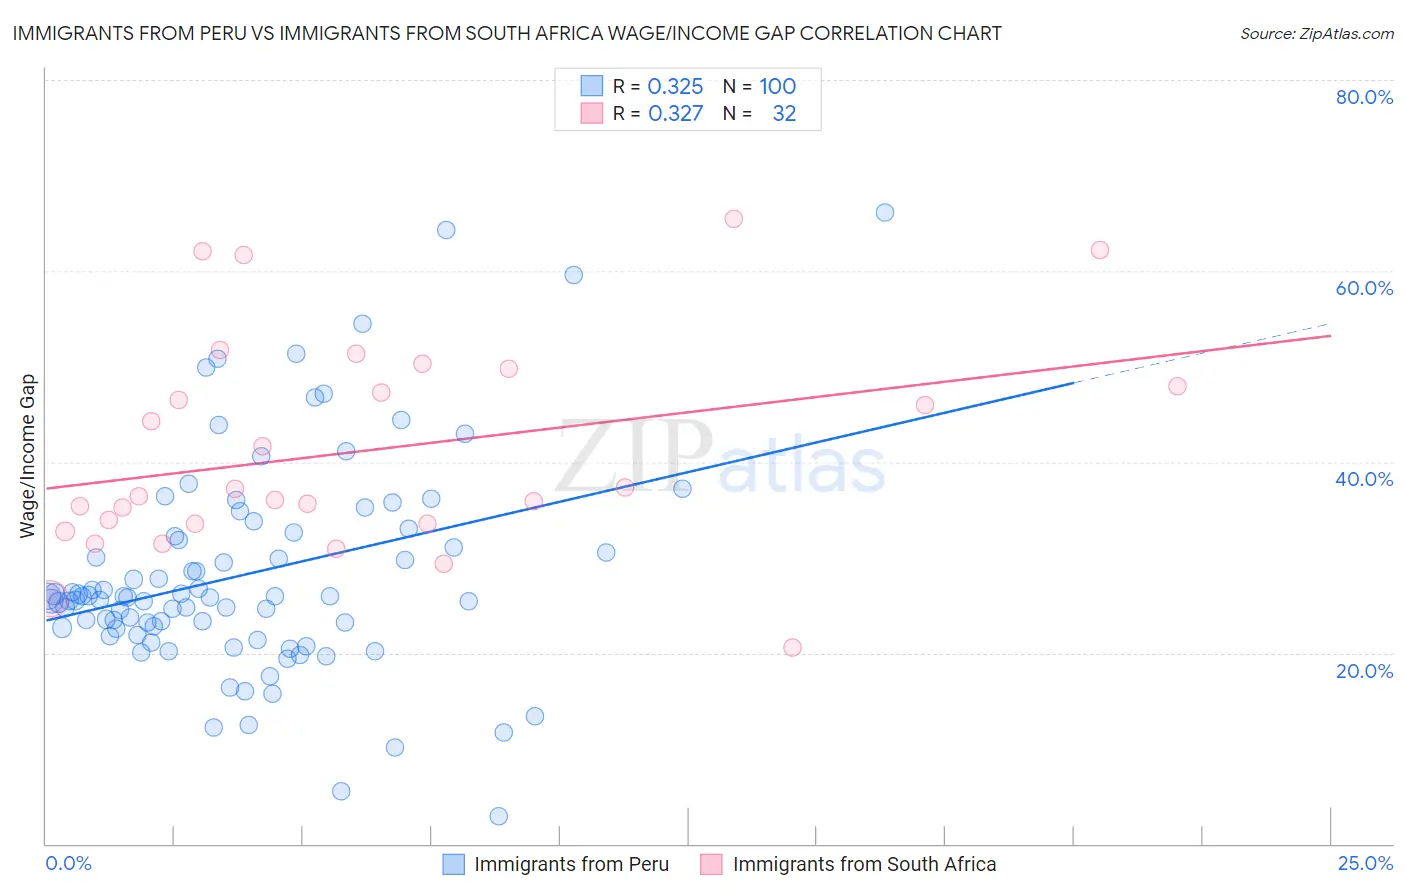 Immigrants from Peru vs Immigrants from South Africa Wage/Income Gap